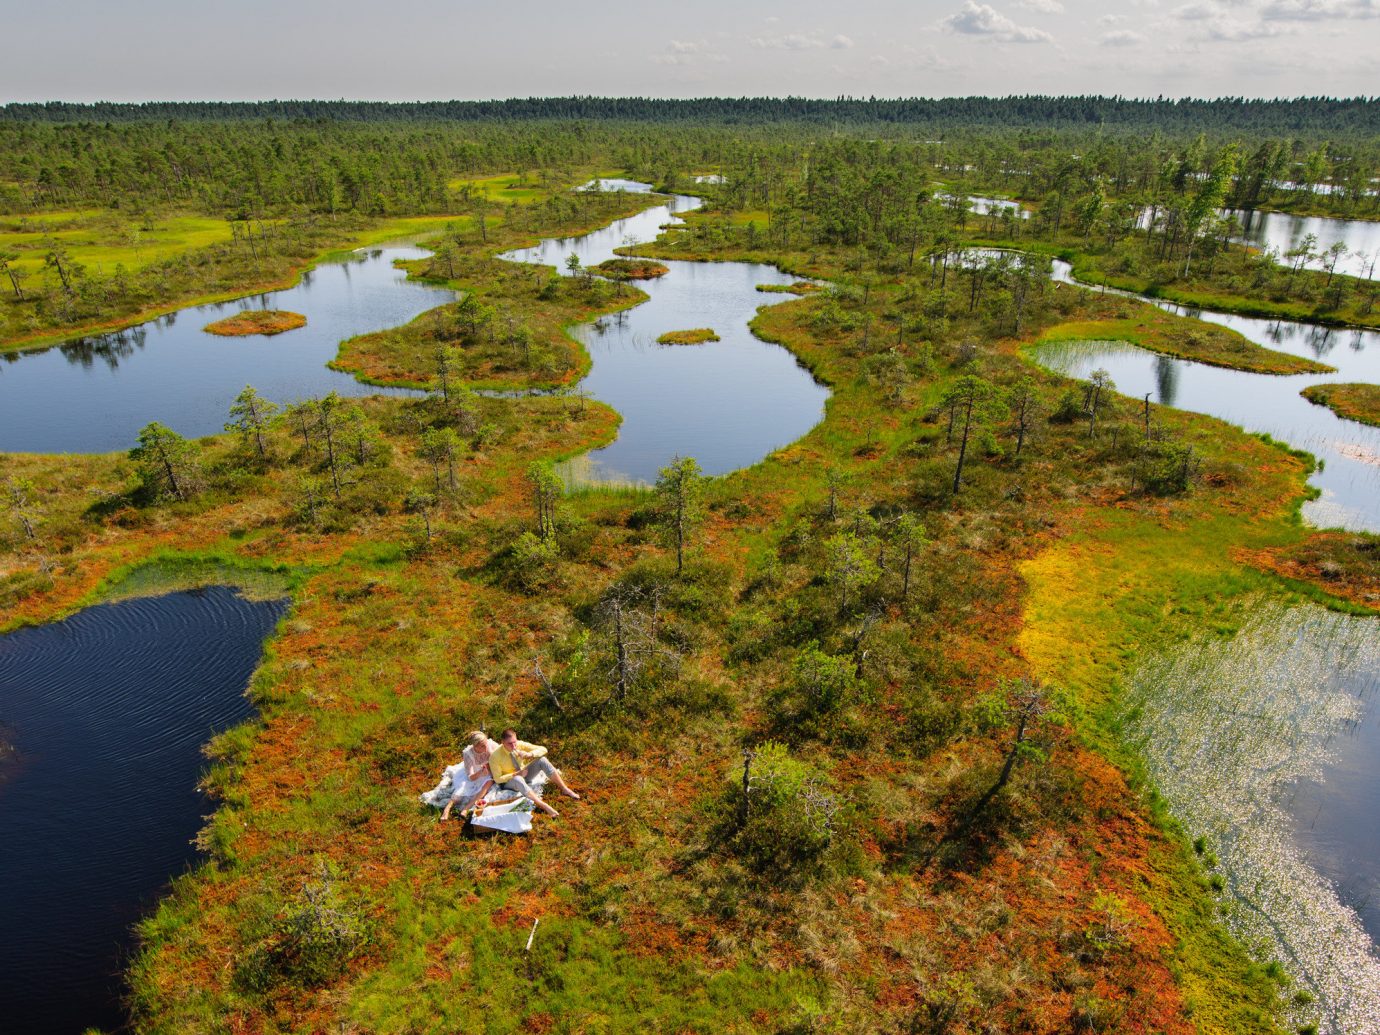 Offbeat grass water outdoor sky River habitat aerial photography wetland geographical feature Nature reflection natural environment wilderness ecosystem plain marsh tundra Lake floodplain green bog reservoir loch estuary pond biome swamp plateau grassy lush surrounded hillside land traveling